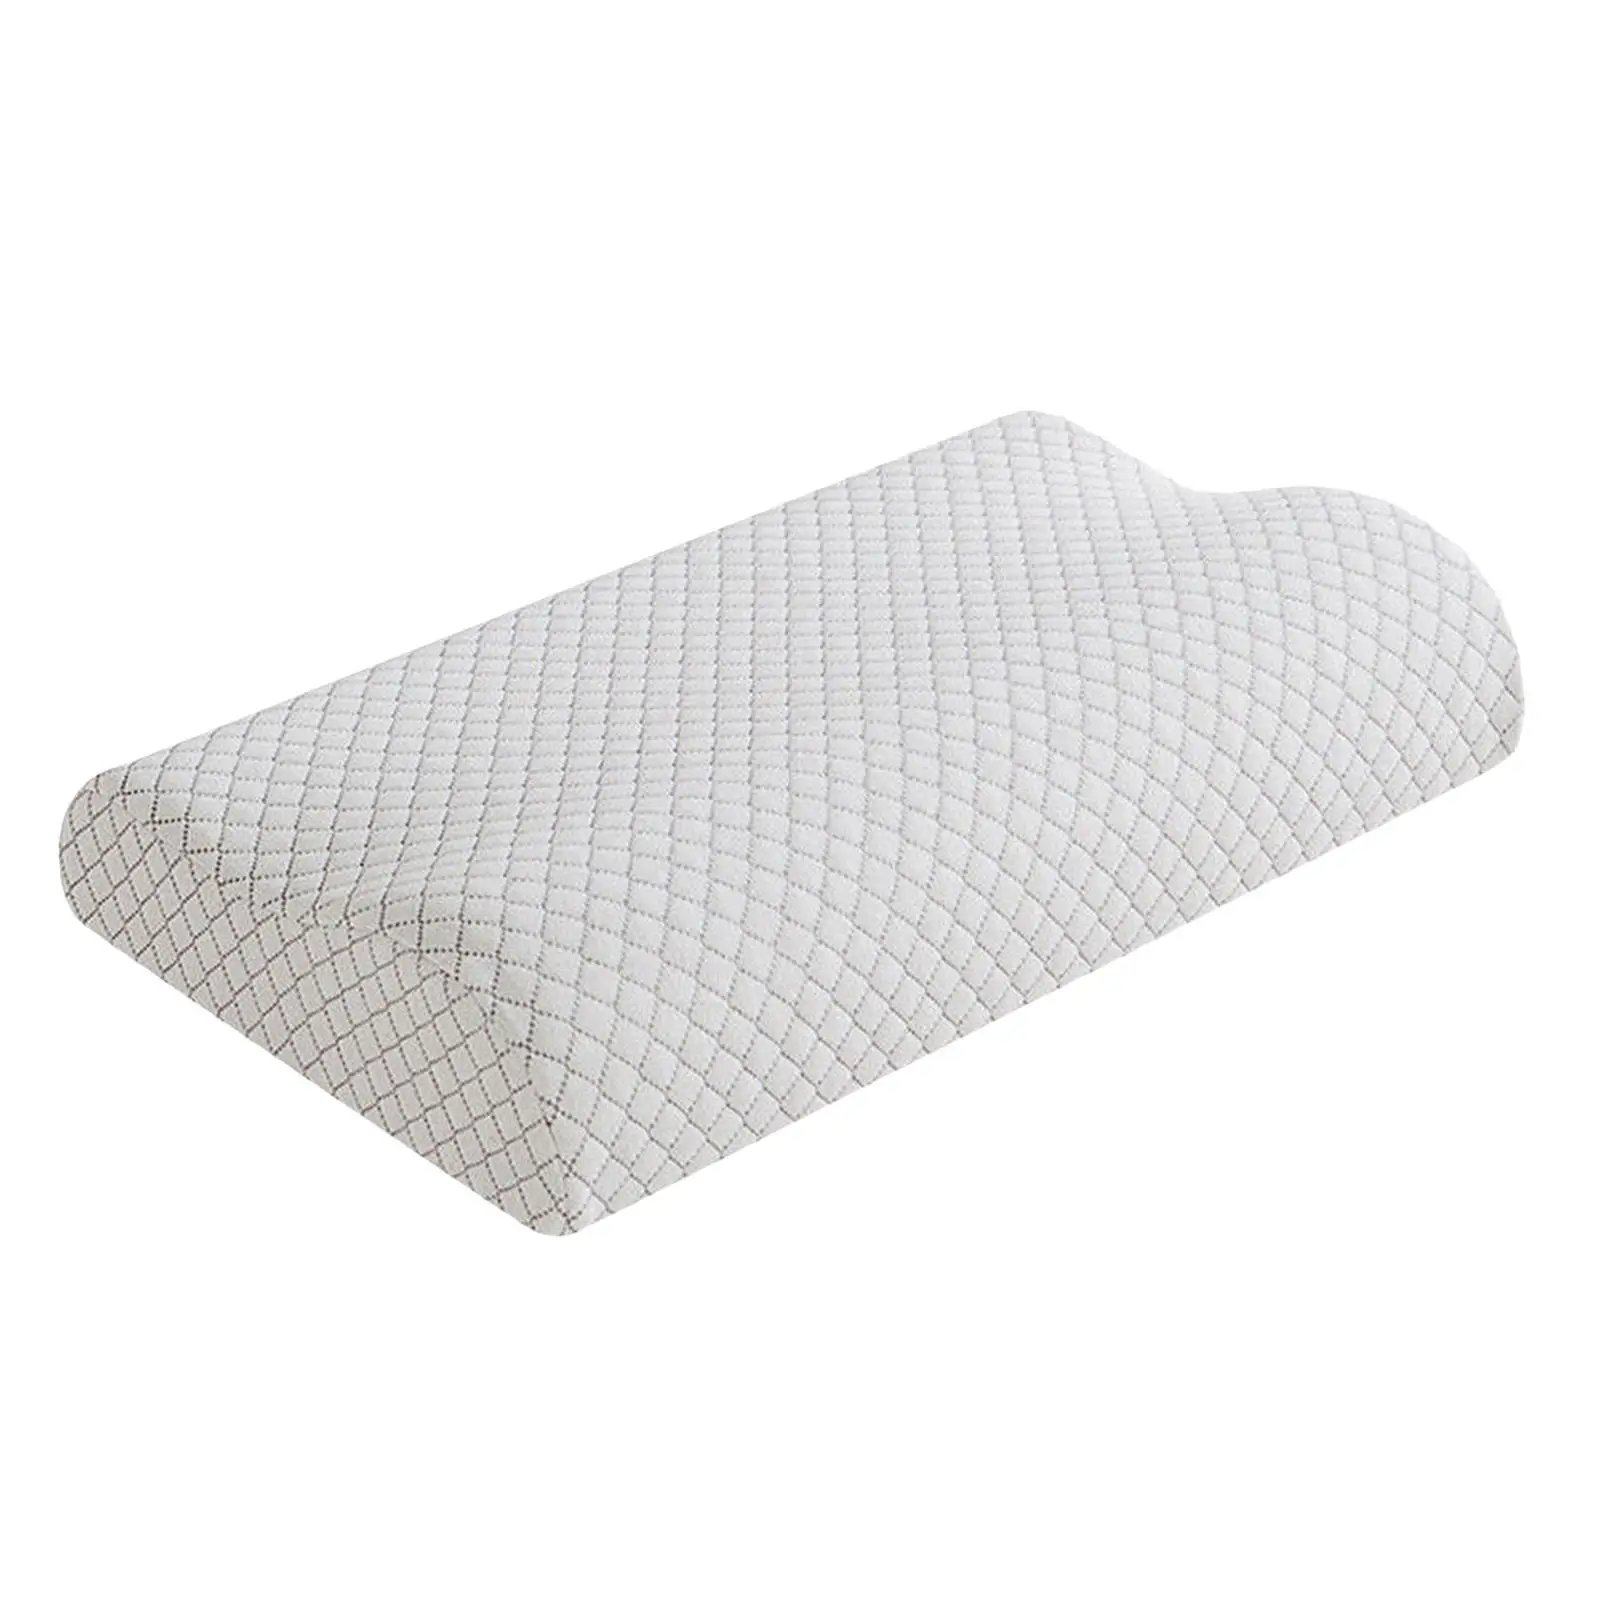 Luxury Bamboo Pillow with Anti Bacterial Hard Memory Foam Fabric Pillow